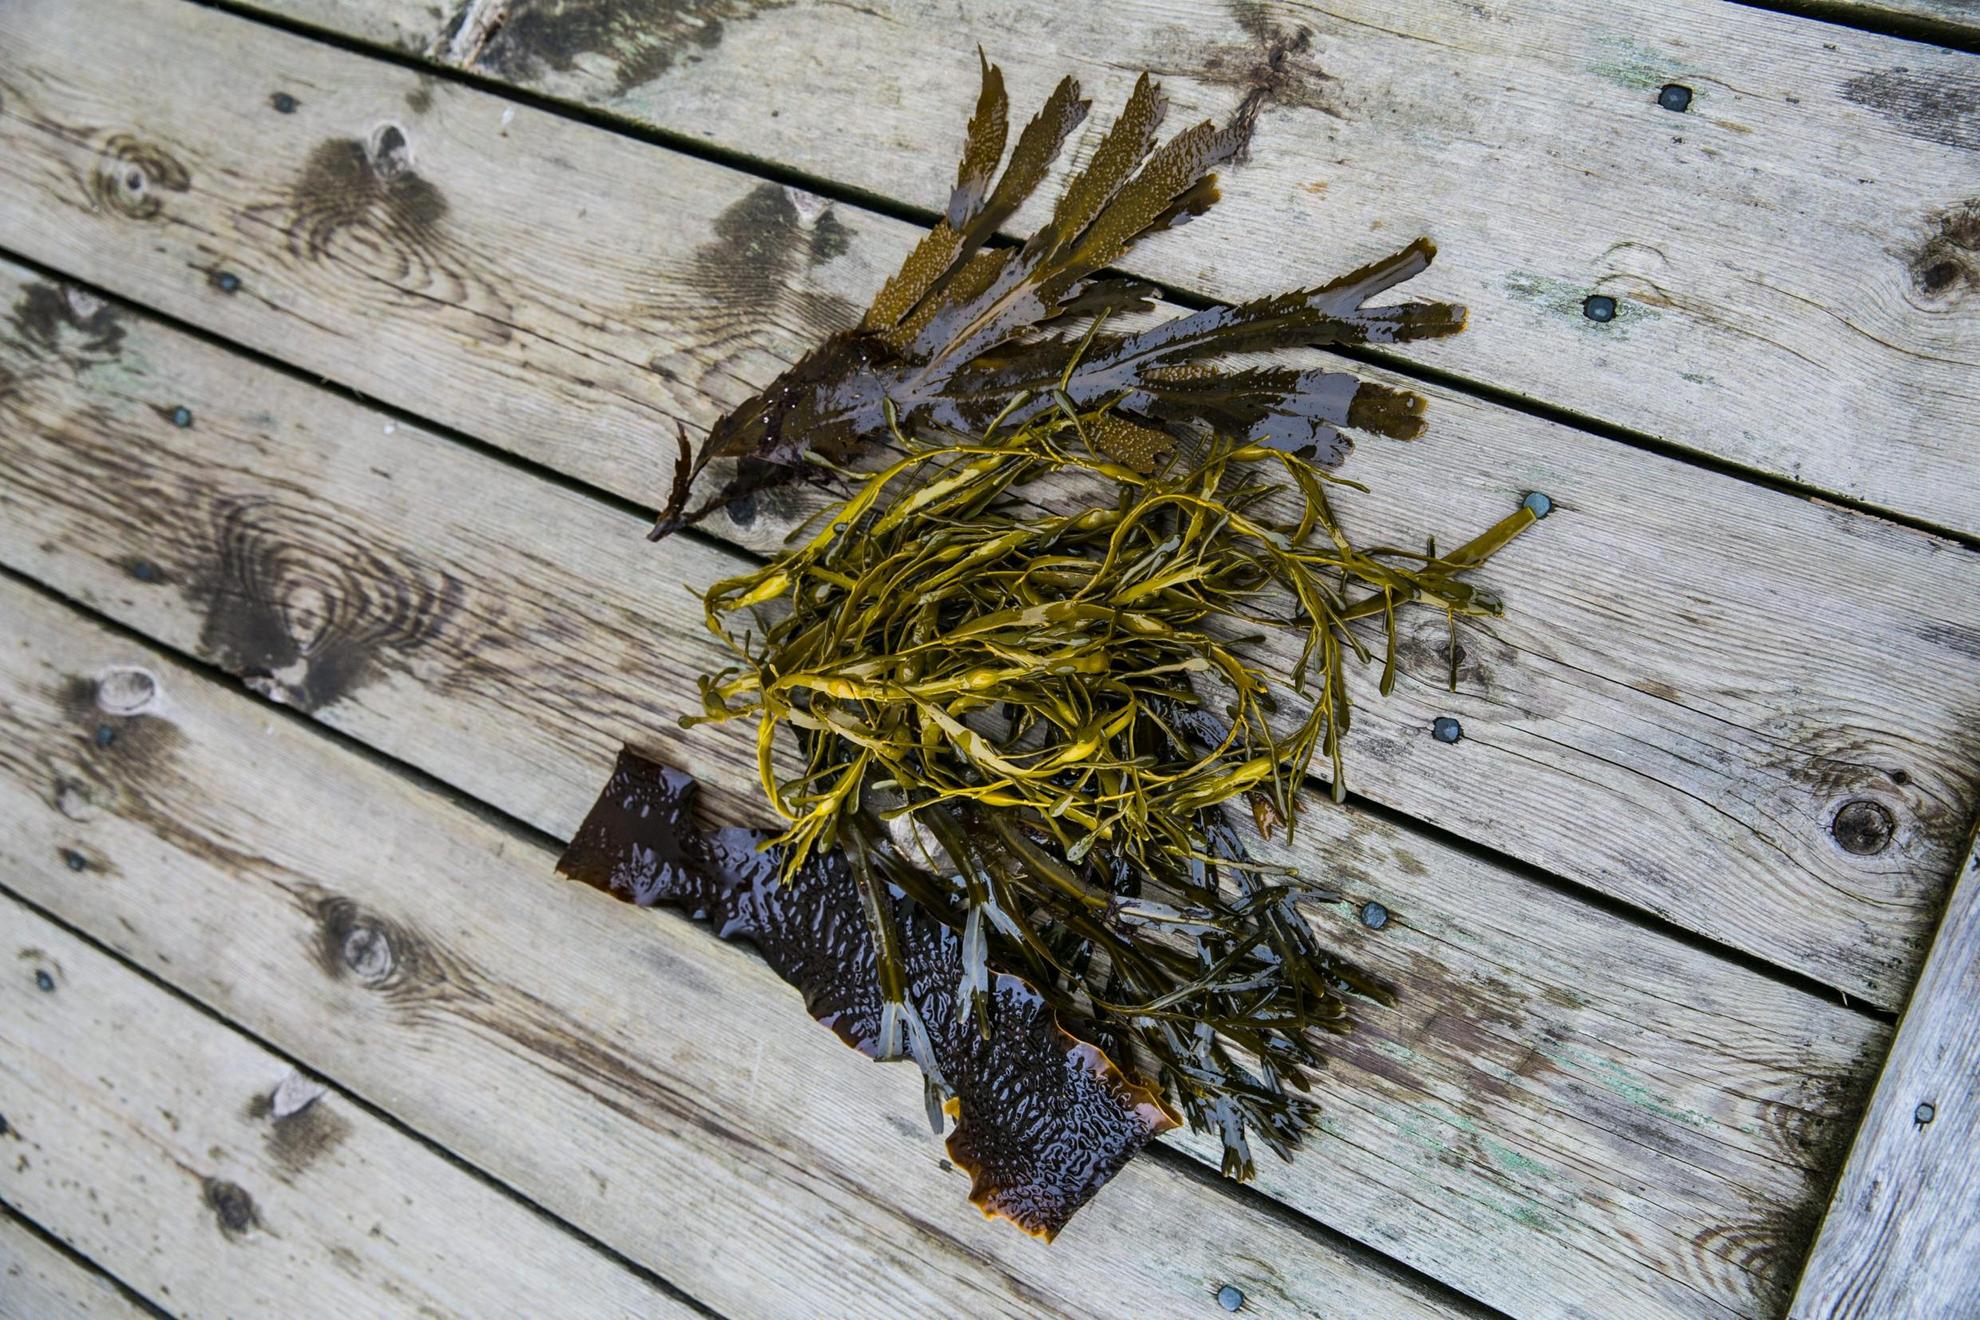 Seaweed lies on a wooden jetty.